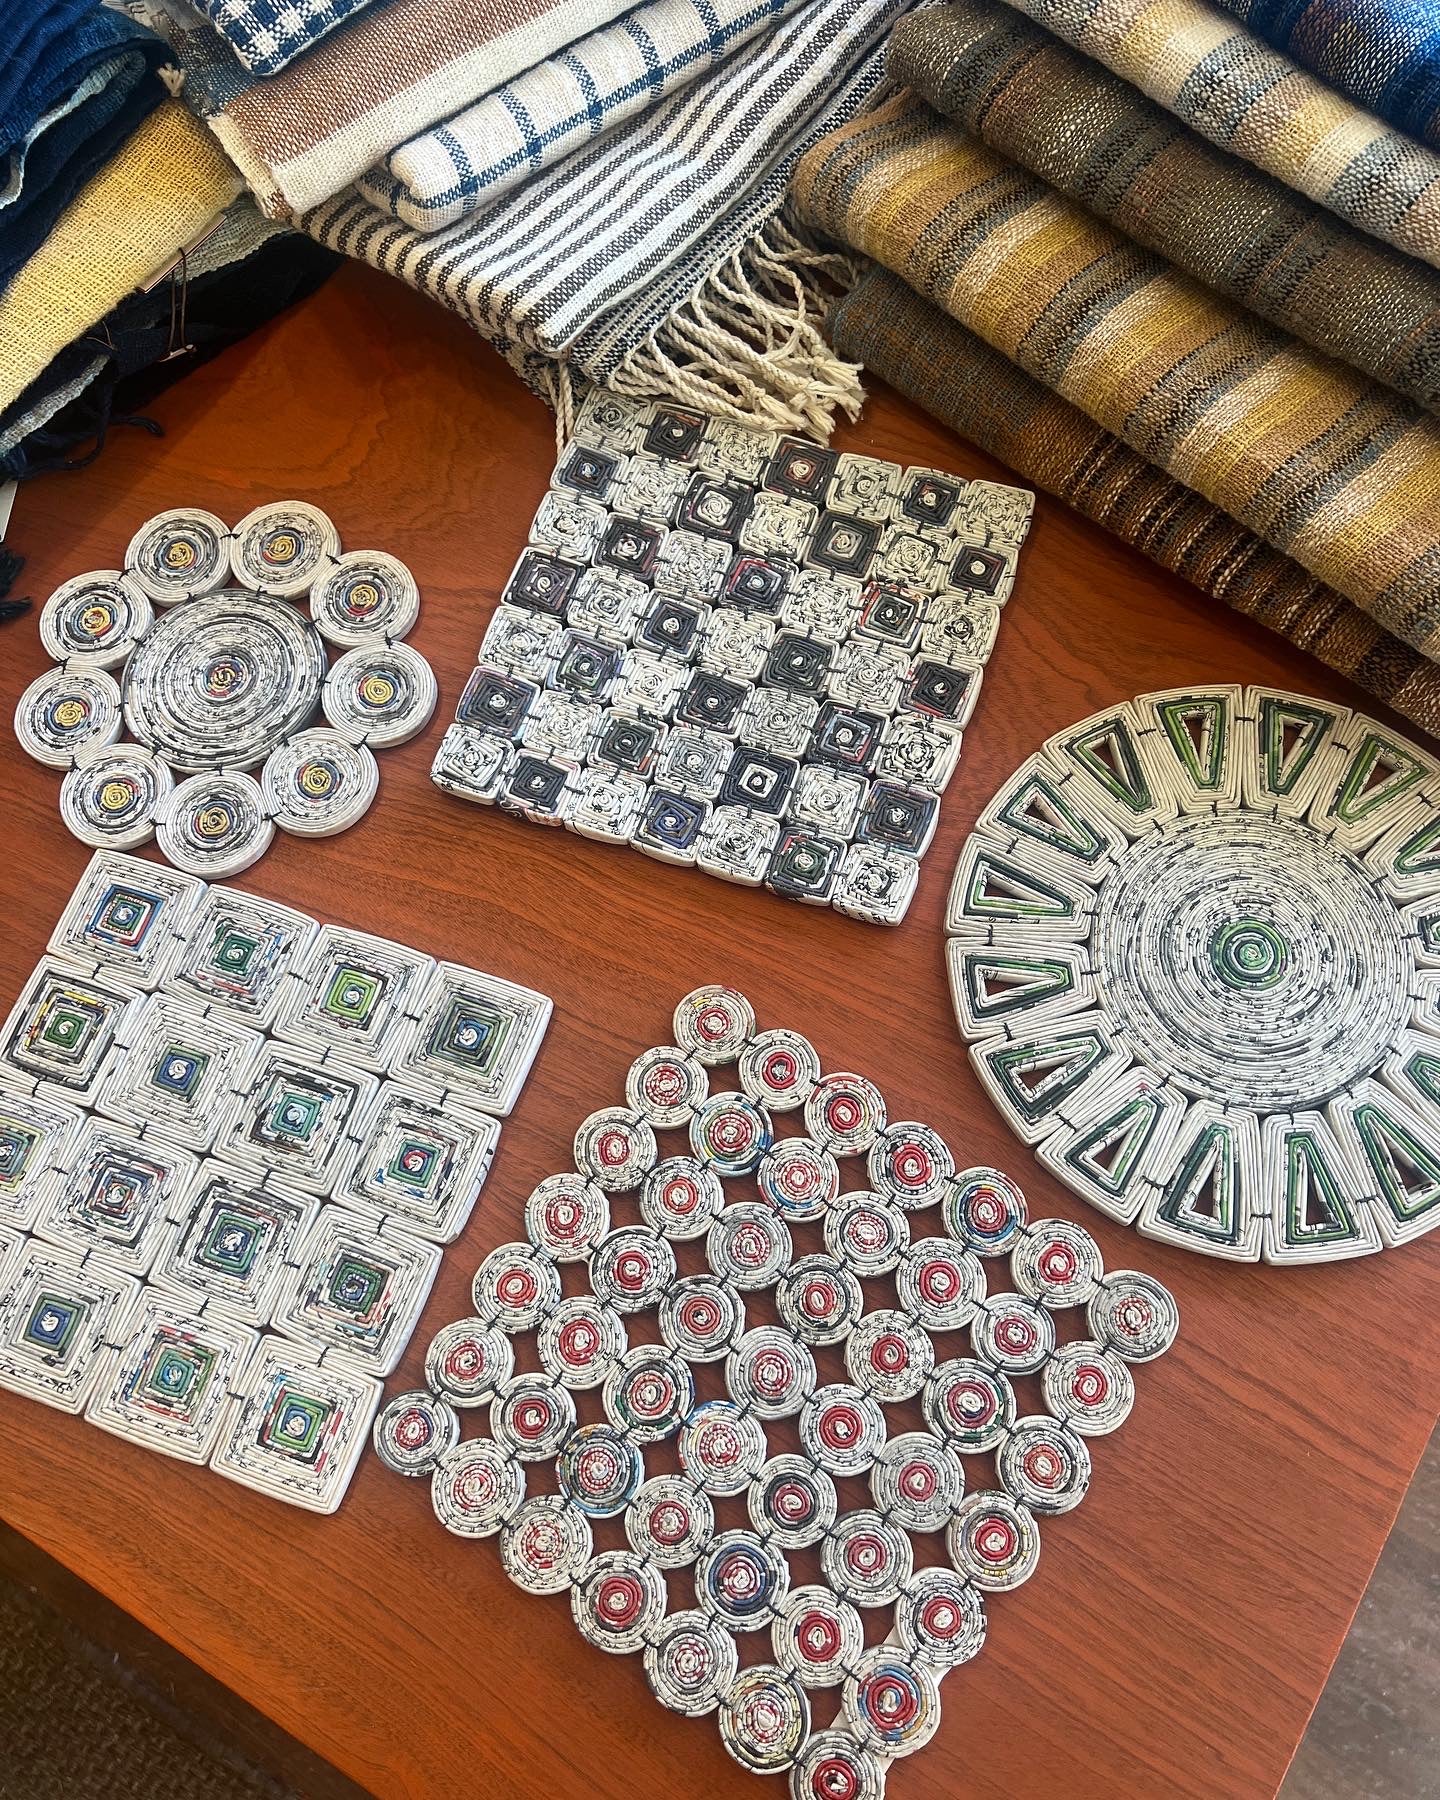 Recycled Paper Trivets (Hot Plate) from the Lao Disabled Women's Center